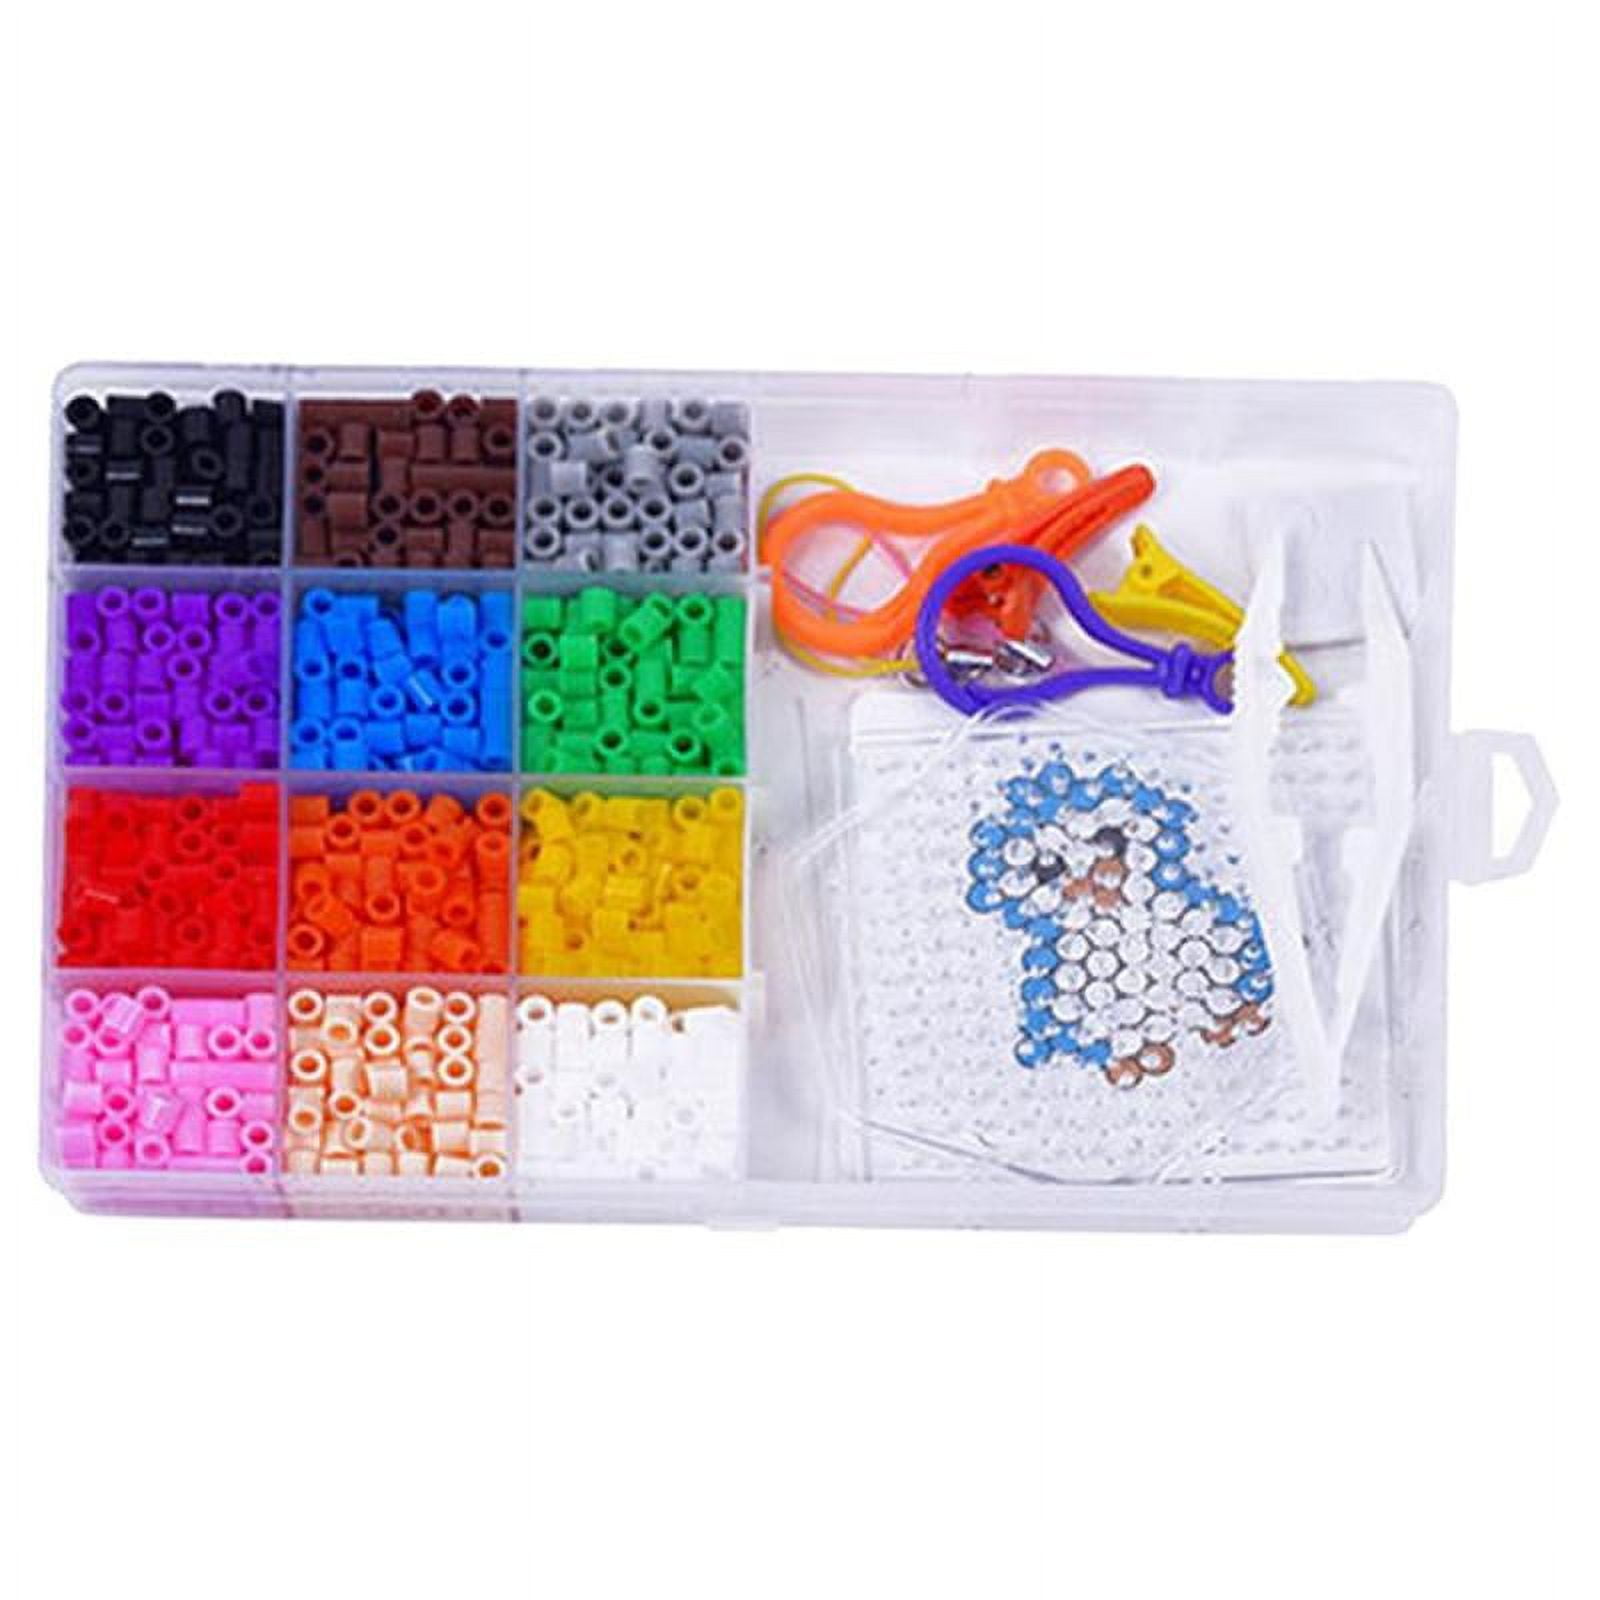 Fuse Beads Kits - Crafting Melting Bead - 5 mm Pegboards - Beads for Kids Crafts. - 12 Colors 1200pcs